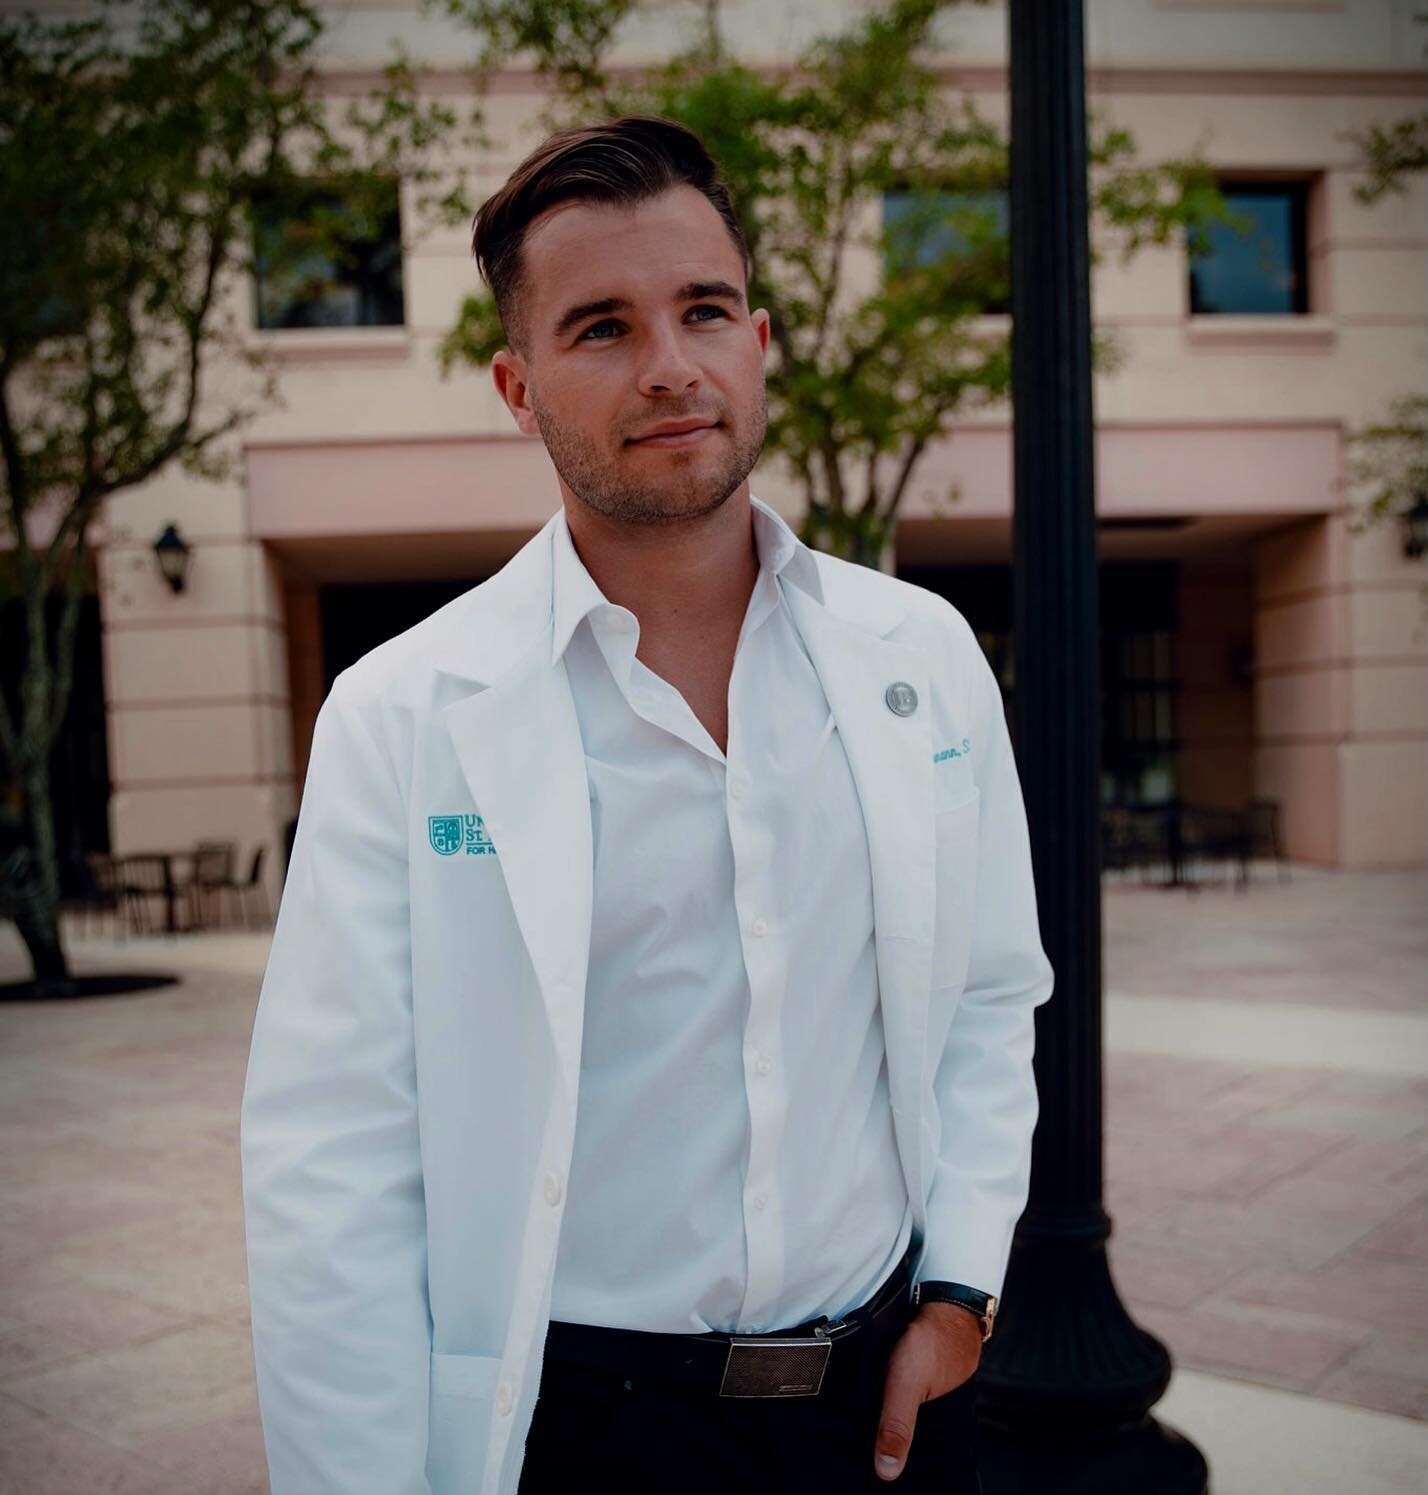 Meet Dr. Eric Behrmann PT, DPT

Dr. Behrmann completed his undergraduate education at Virginia Tech in 2018 where he majored in the science of human nutrition, food, and exercise. He then went on to receive his Doctorate of Physical Therapy from the 